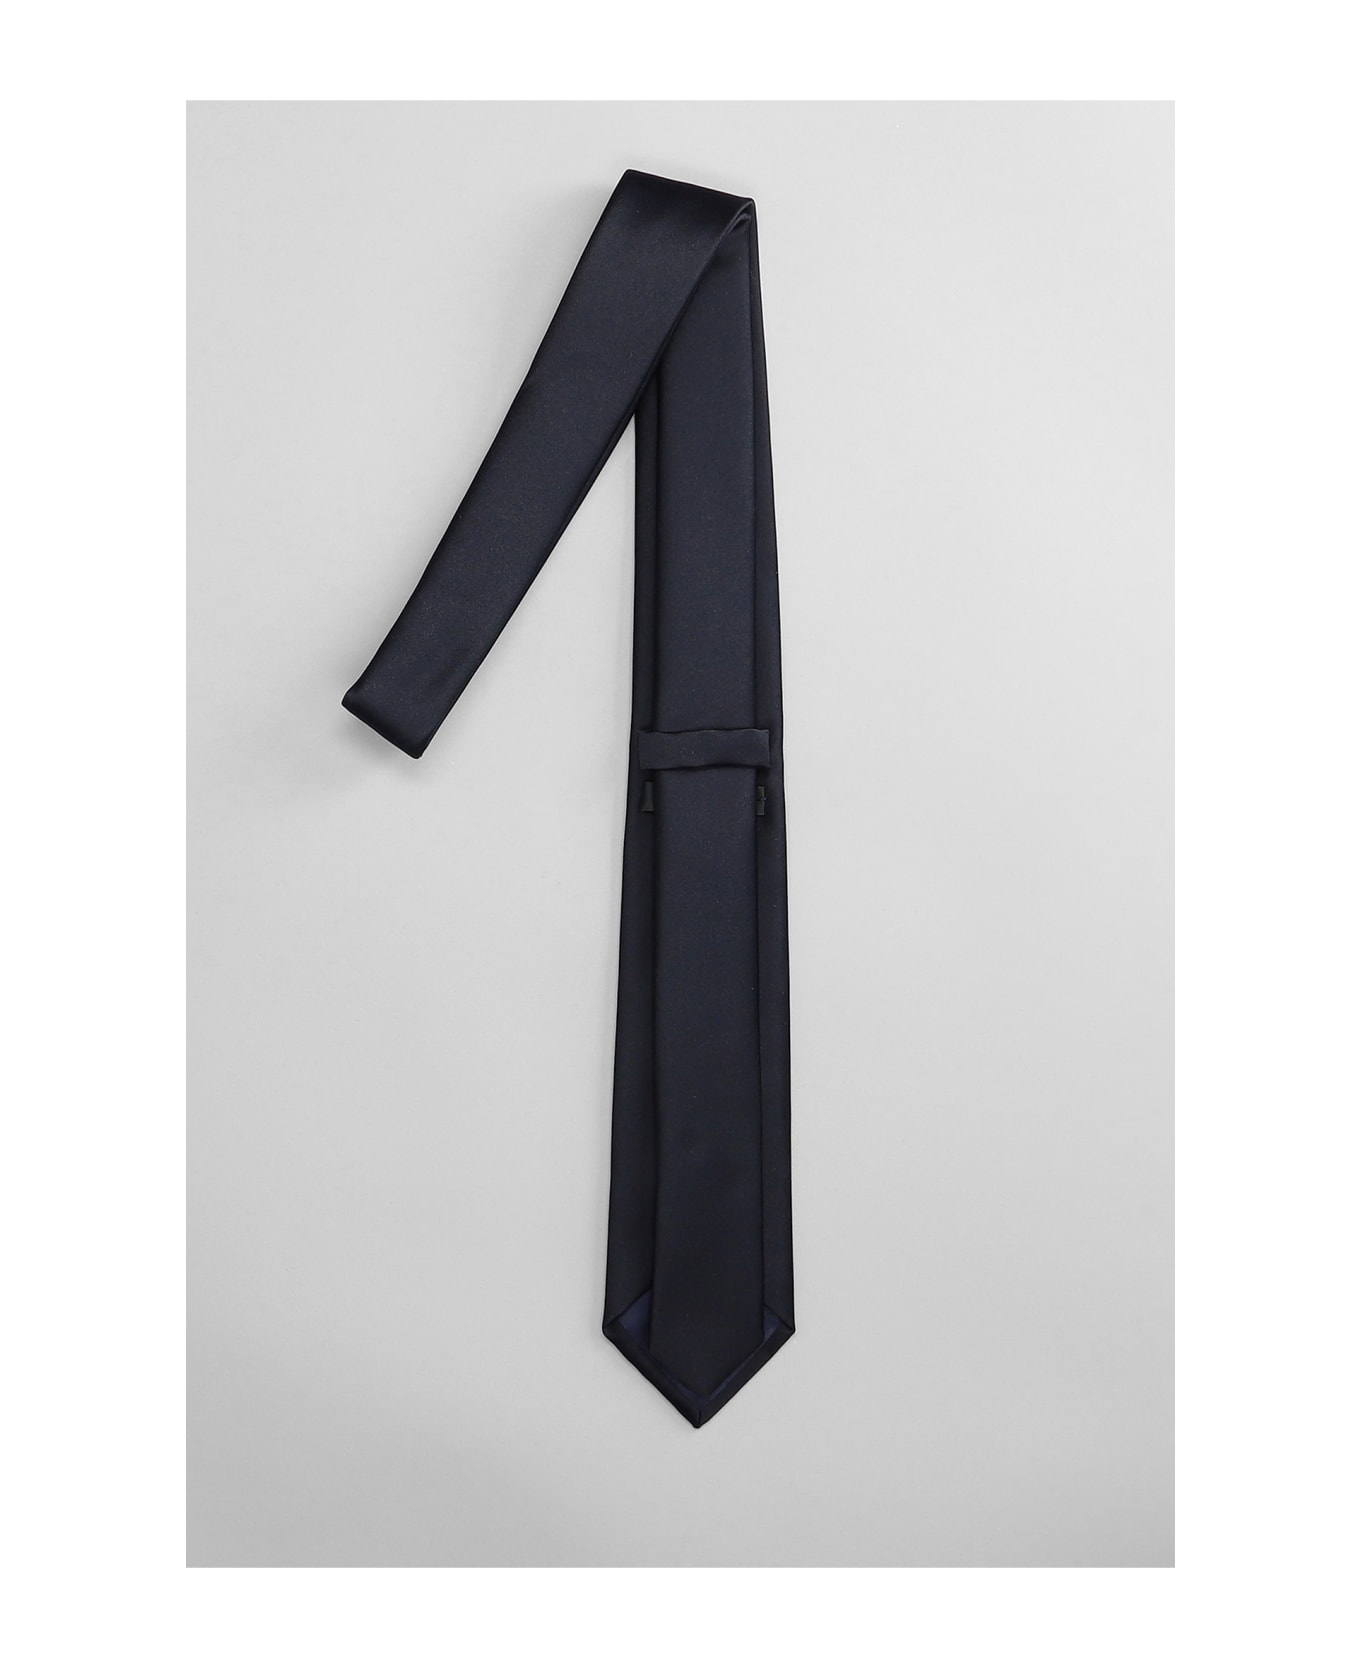 Tagliatore Tie In Blue Polyester - blue ネクタイ